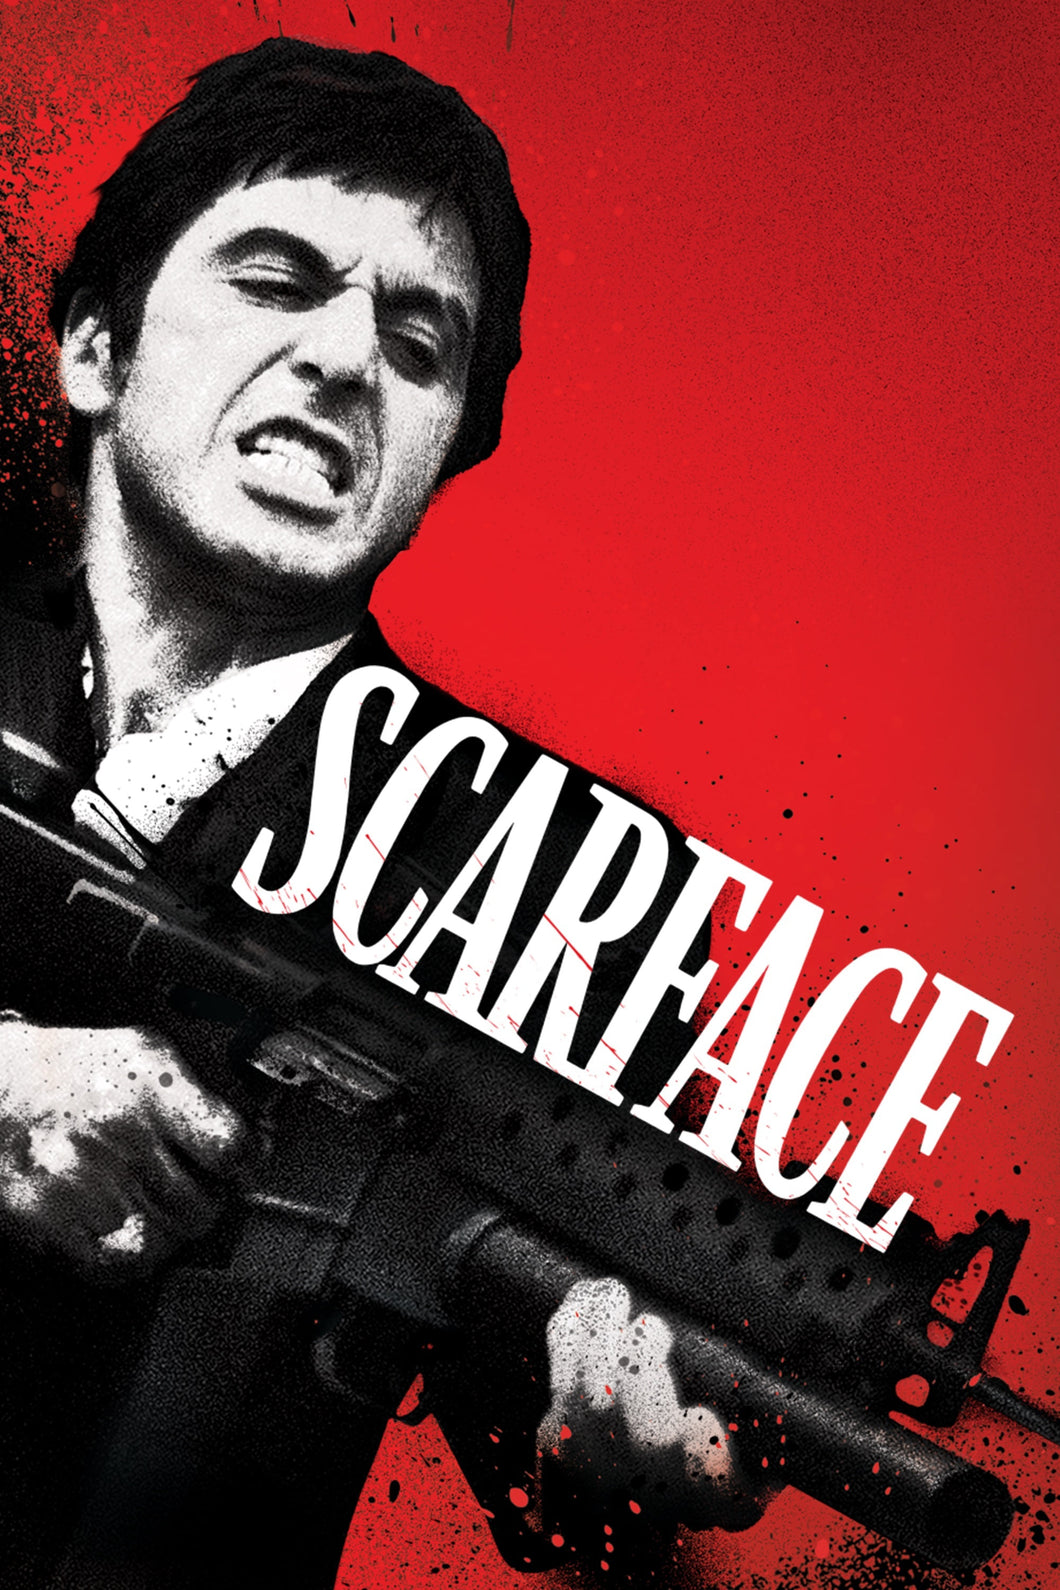 Scarface (1983) v3 Movie Poster High Quality Glossy Paper A1 A2 A3 A4 A3 Framed or Unframed!!